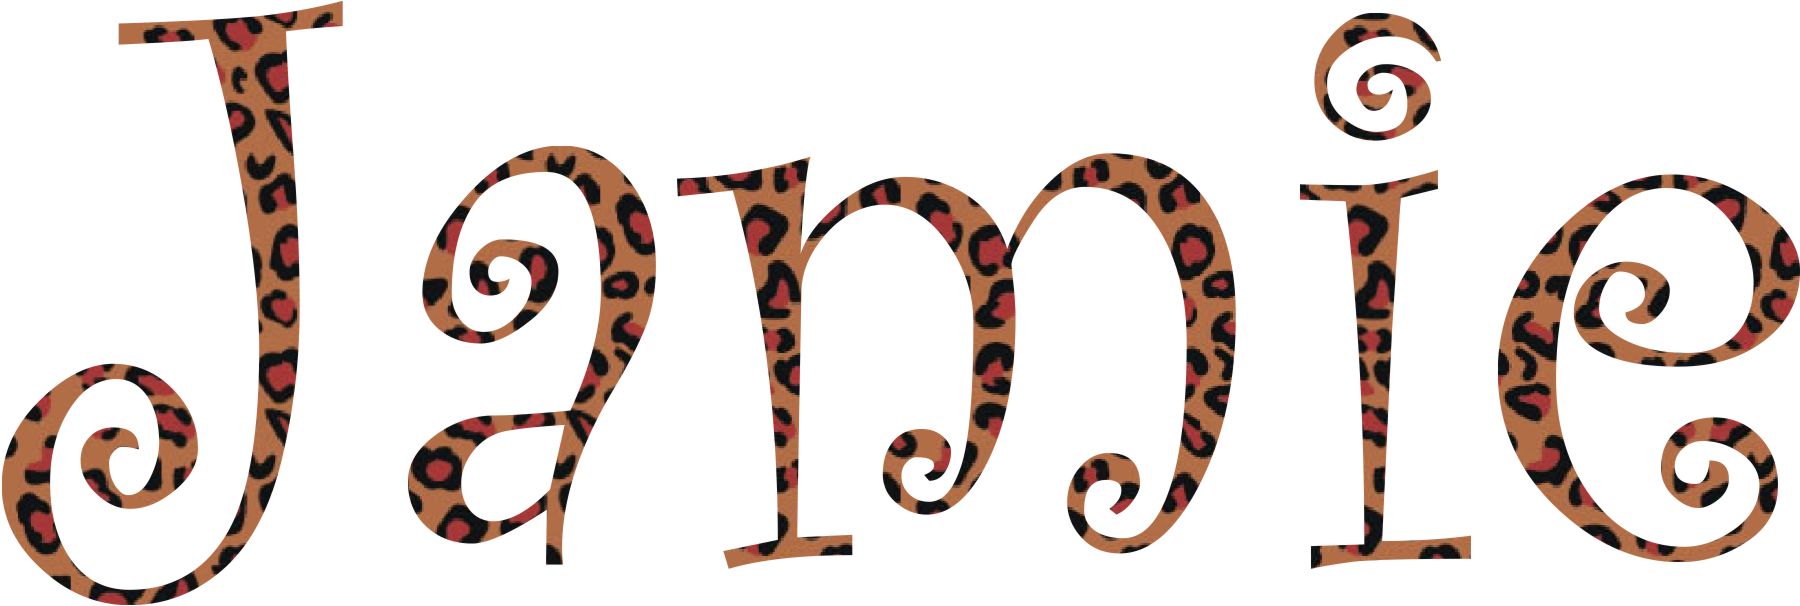 free-leopard-print-font-download-free-leopard-print-font-png-images-free-cliparts-on-clipart